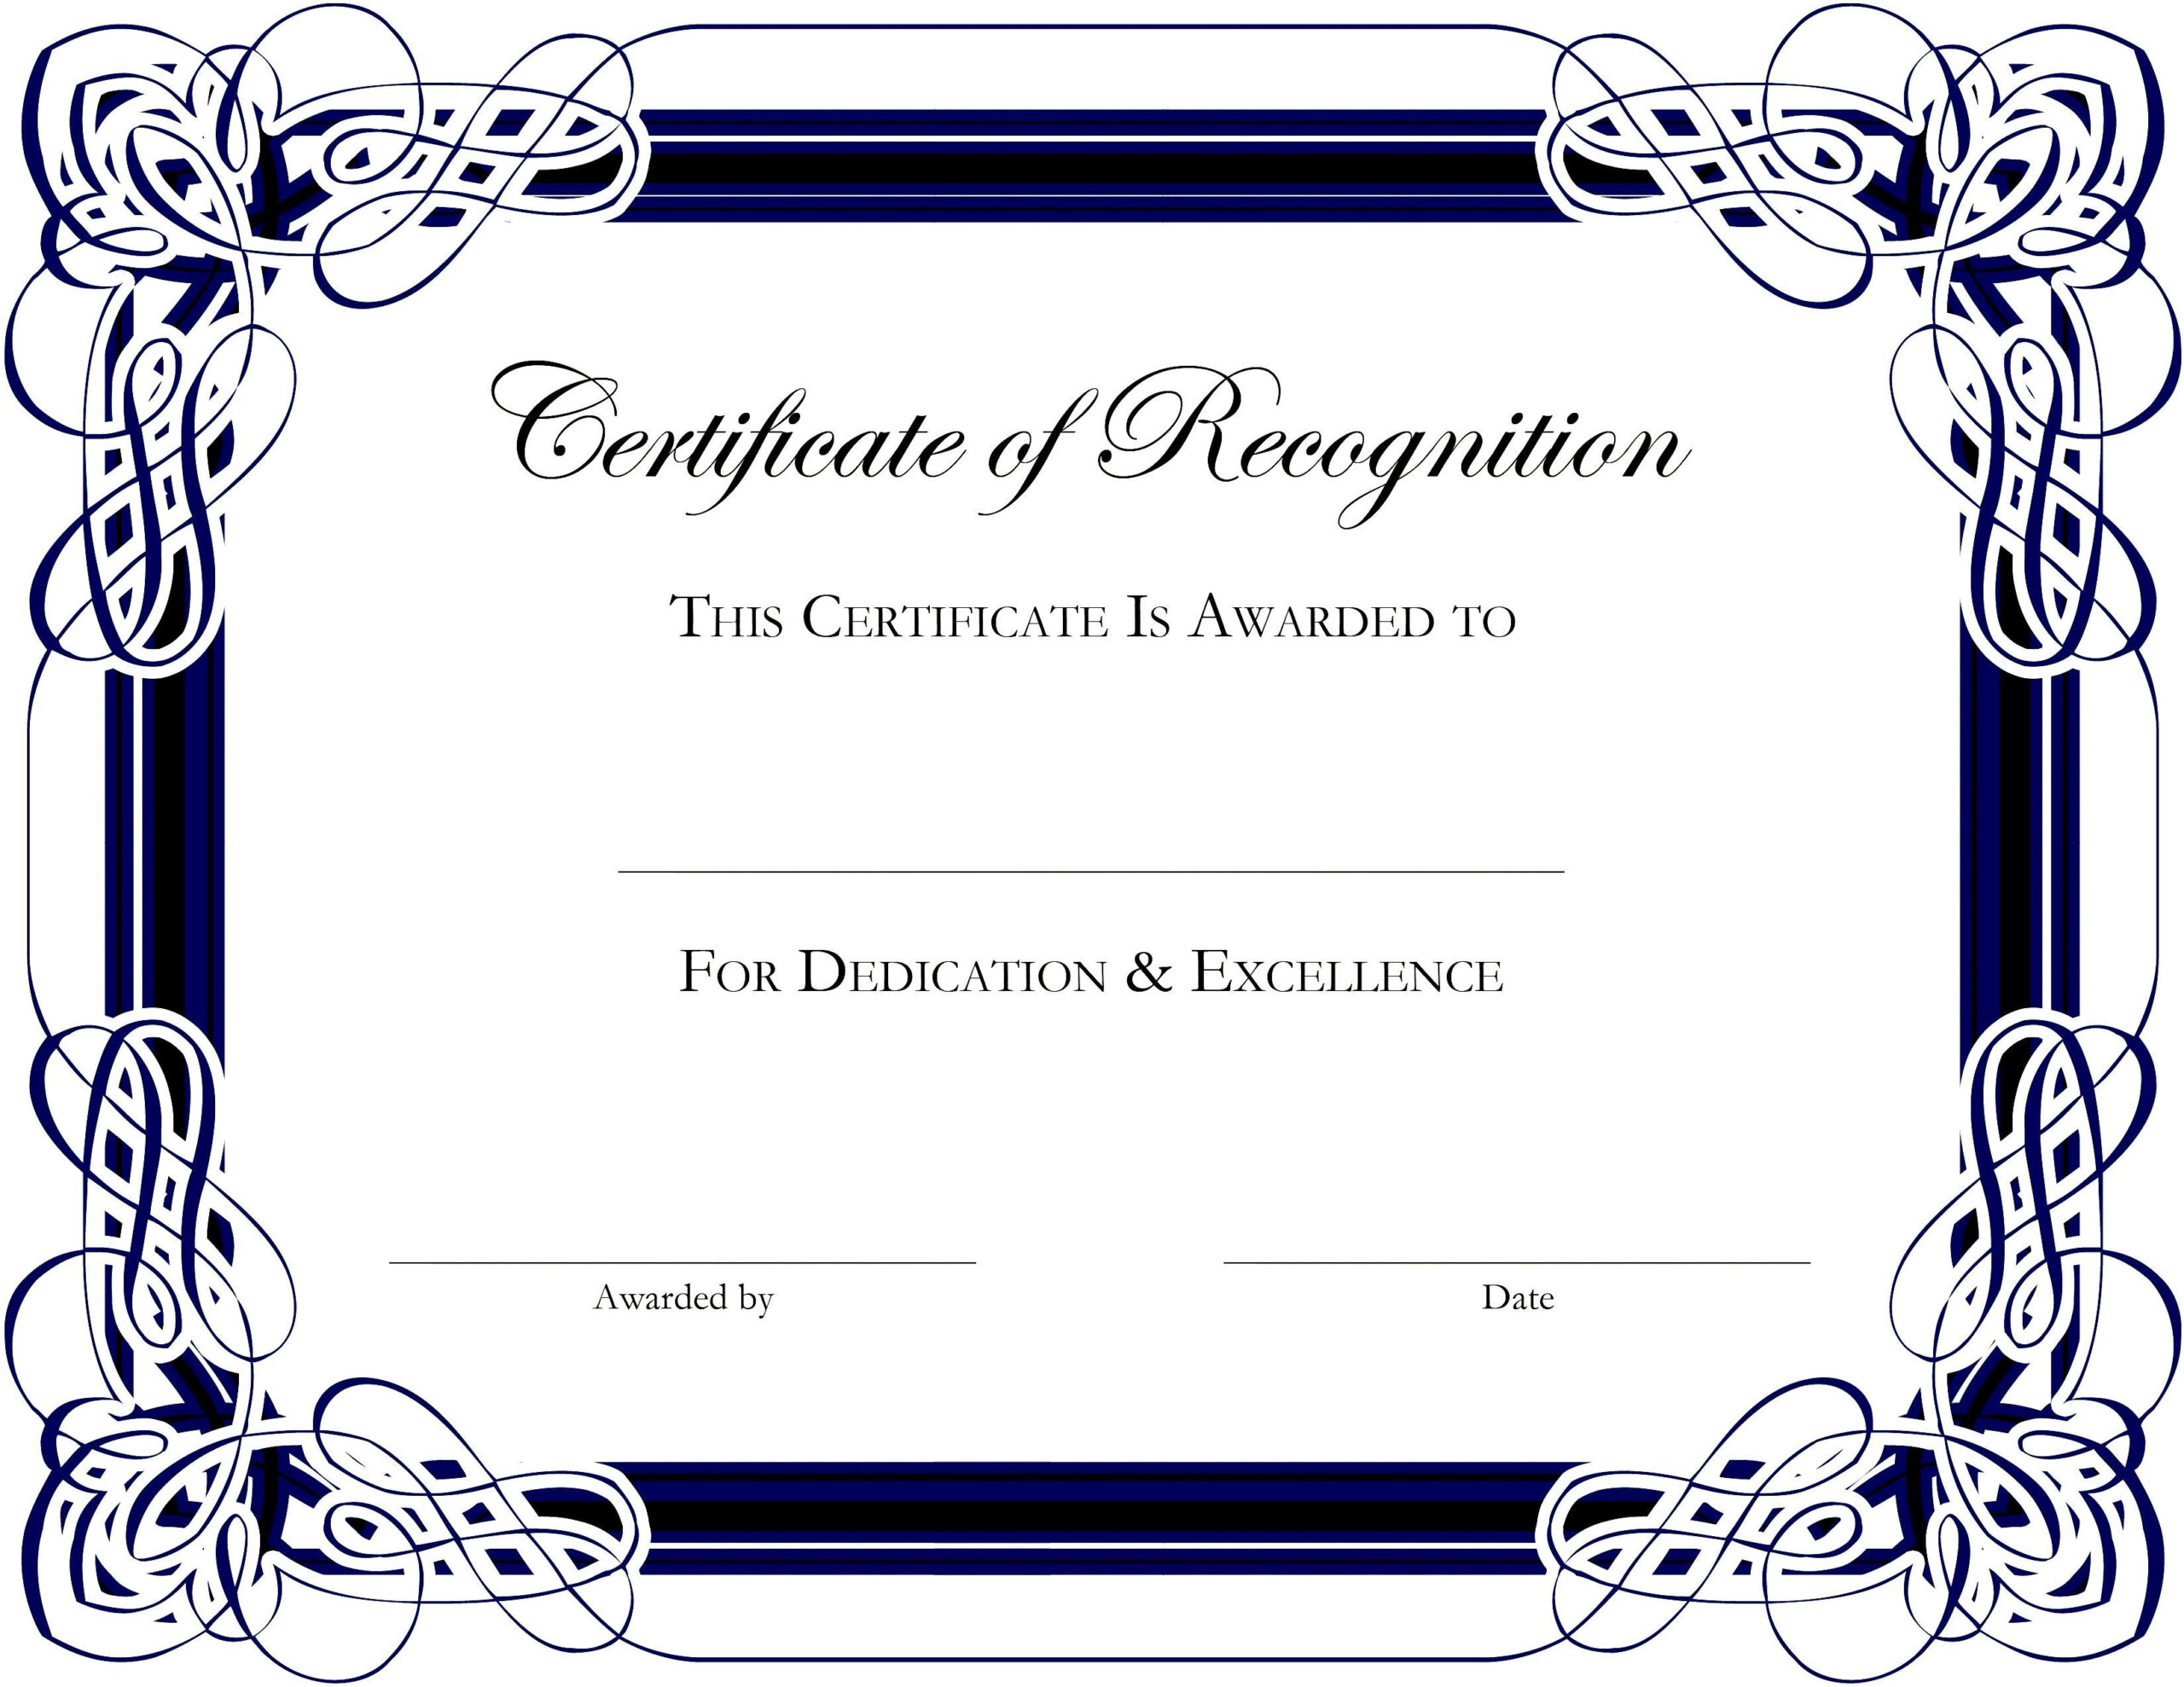 Award Templates For Microsoft Publisher | Besttemplate123 Intended For Microsoft Word Award Certificate Template